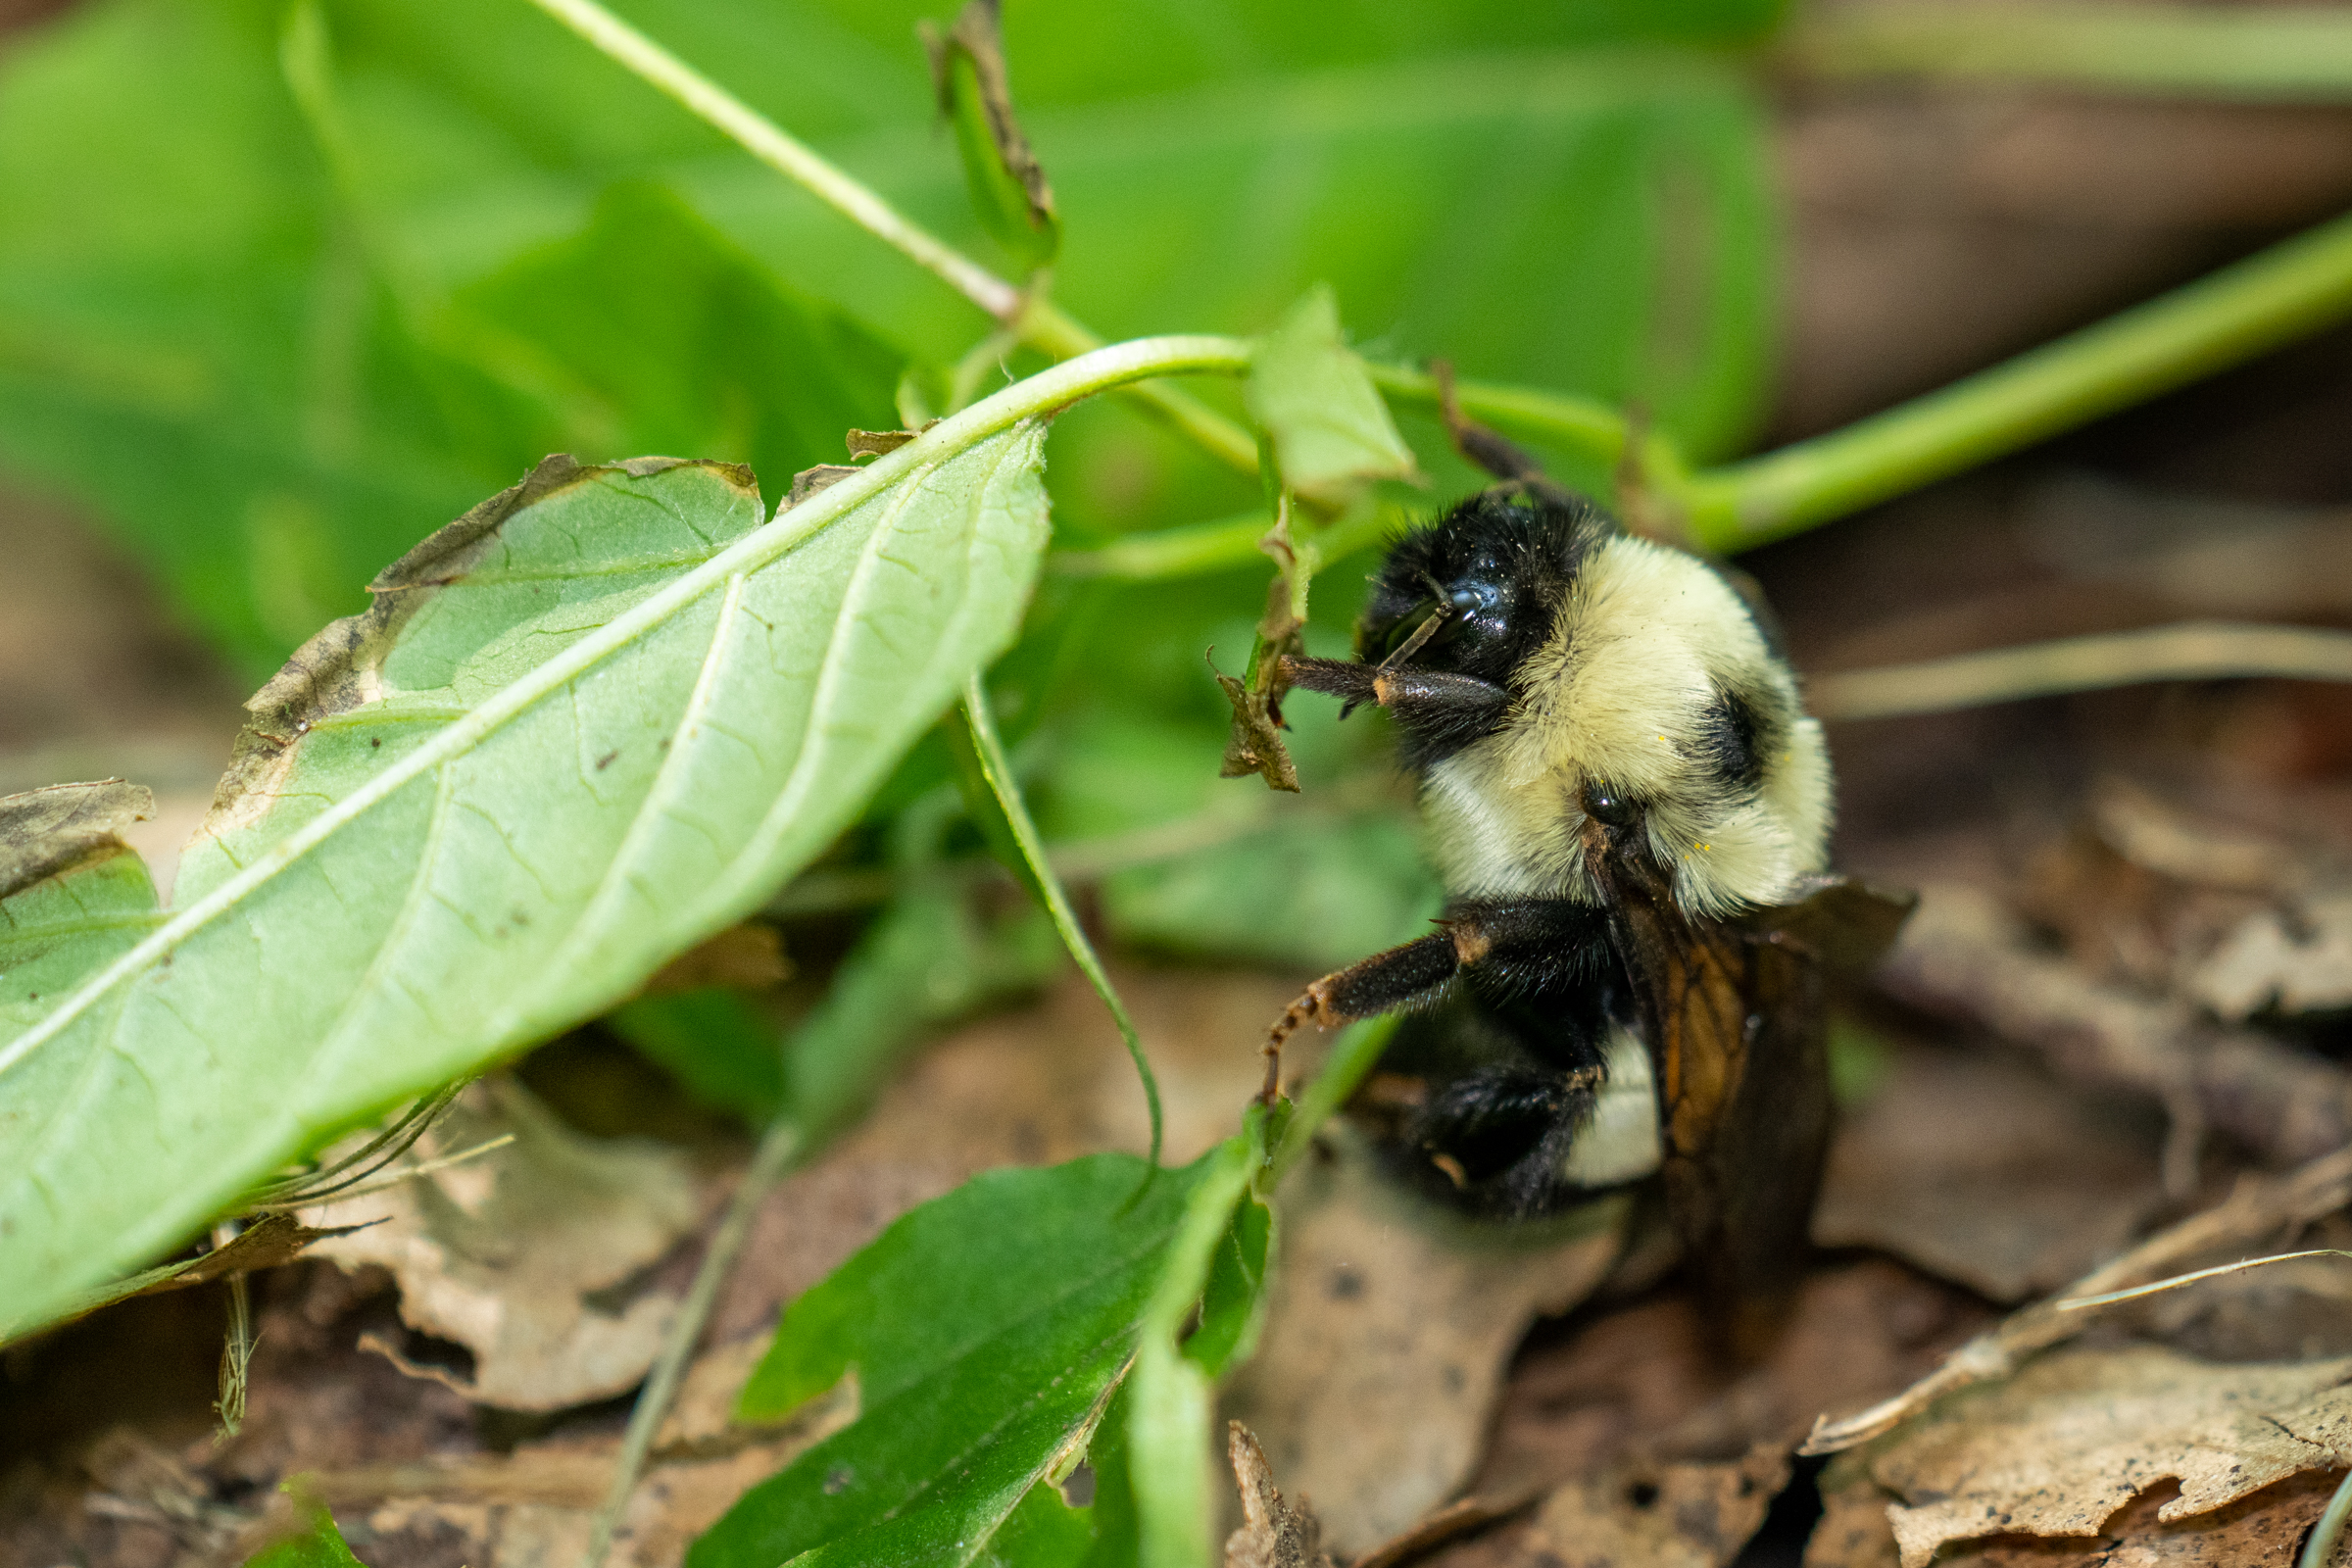 rusty patched bumble bee